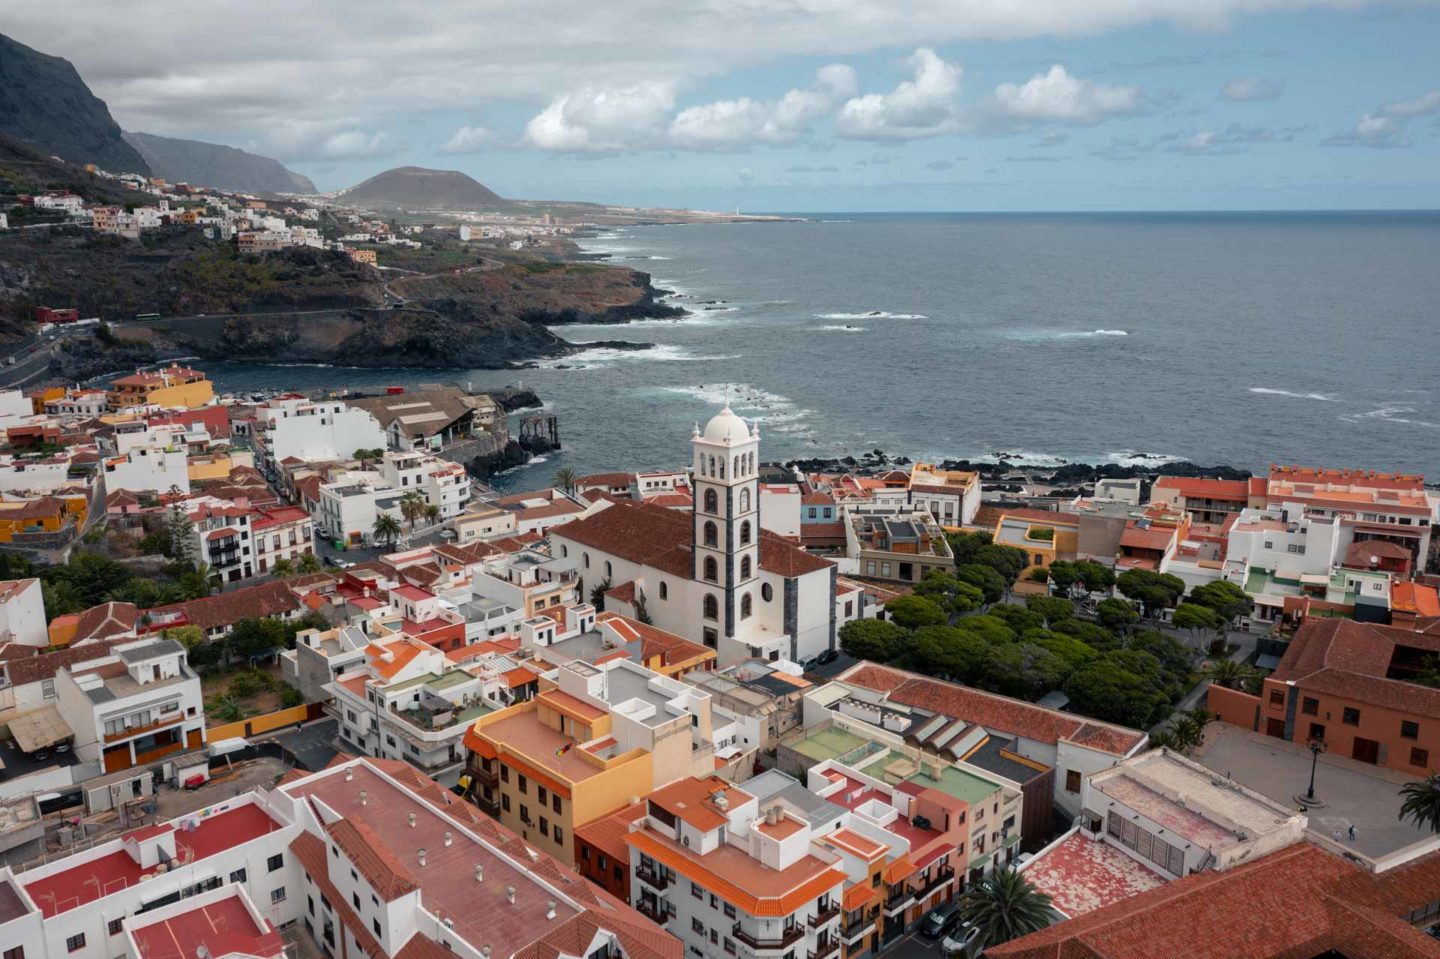 things to do in tenerife, tenerife attractions, places to visit in tenerife, what to do in tenerife